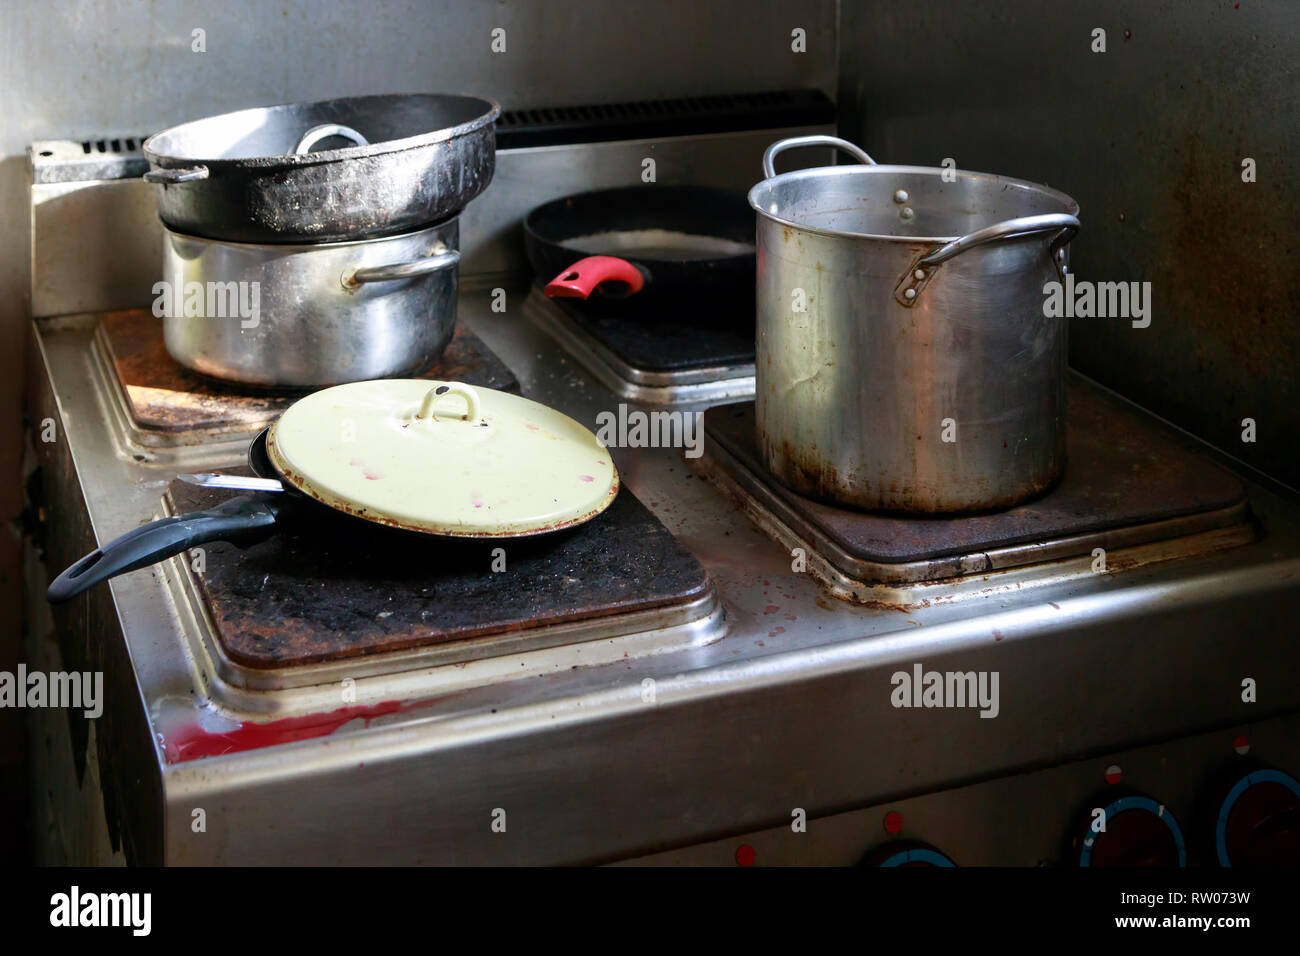 Dirty pots and pans are placed on a stainless steel electric stove on the galley on the ship Stock Photo